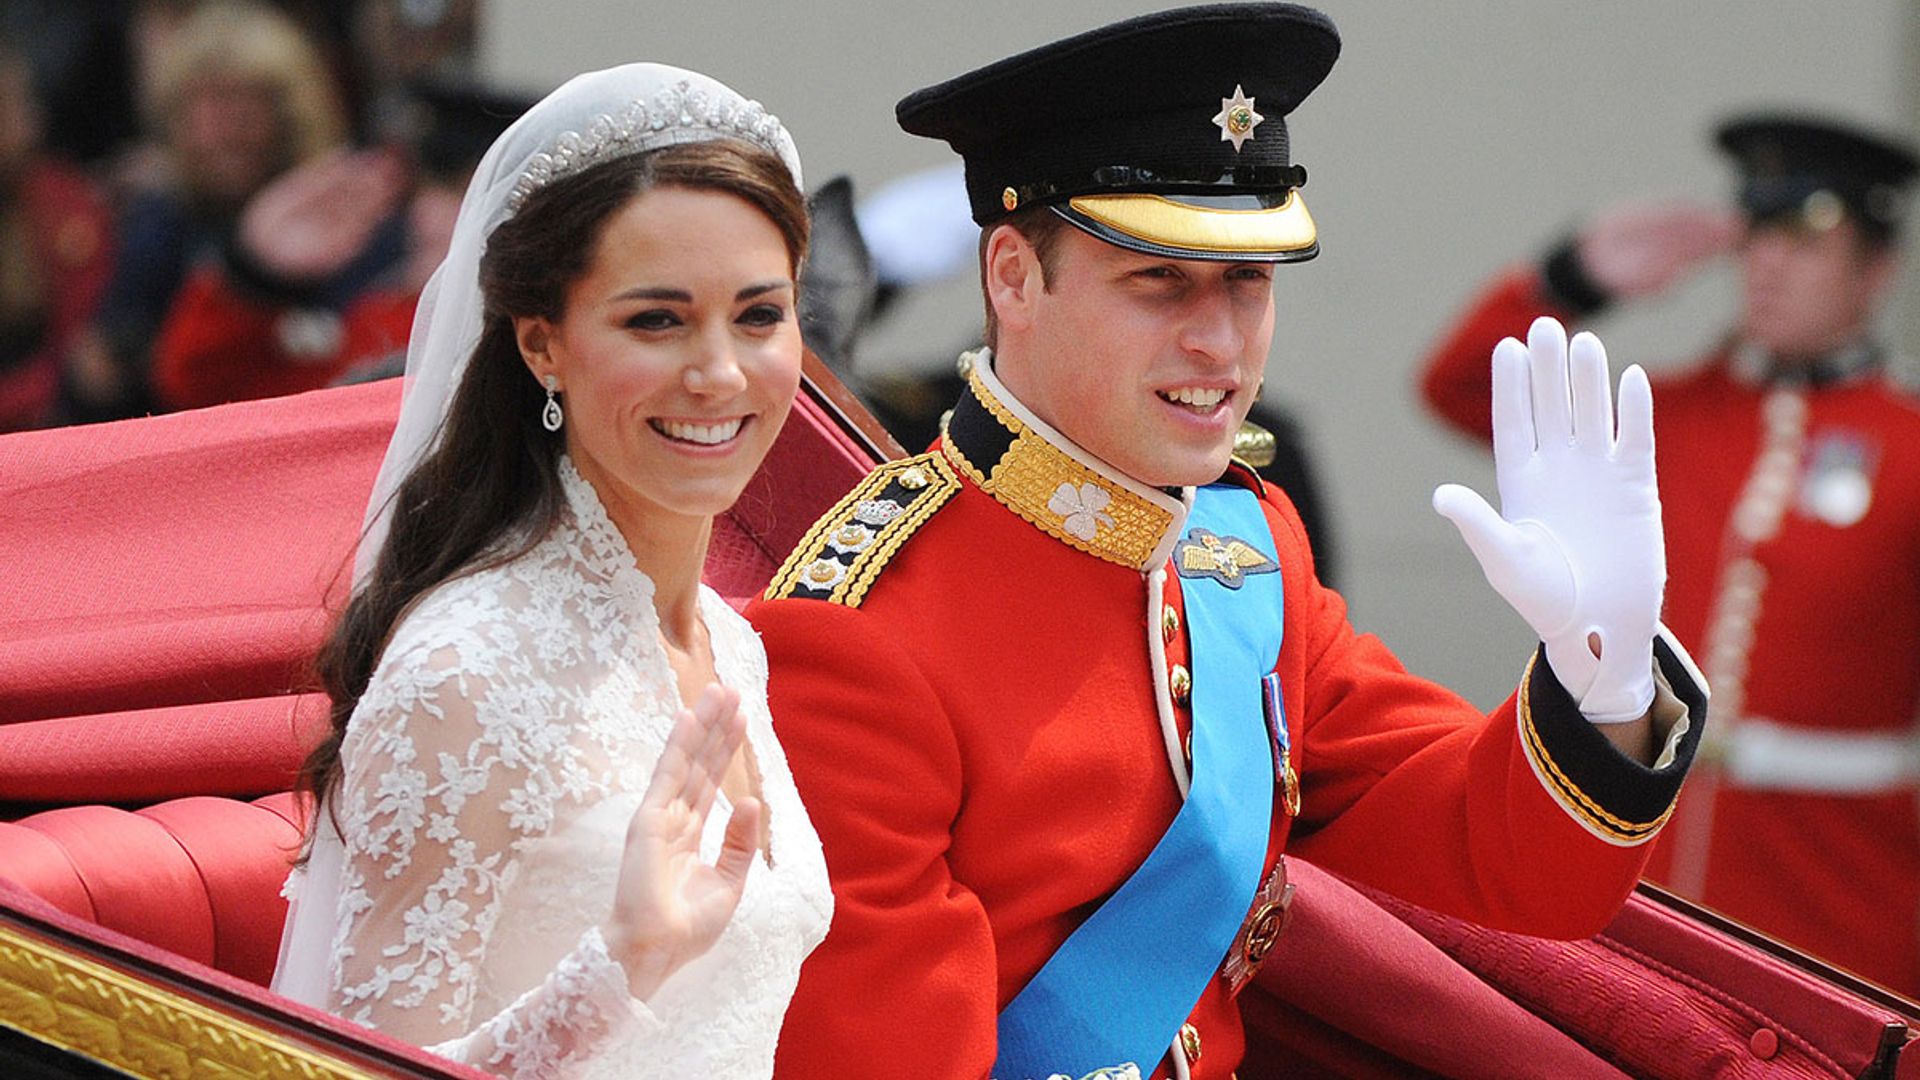 Princess Kate's 'fertility was tested' before marriage to Prince William - new book claims